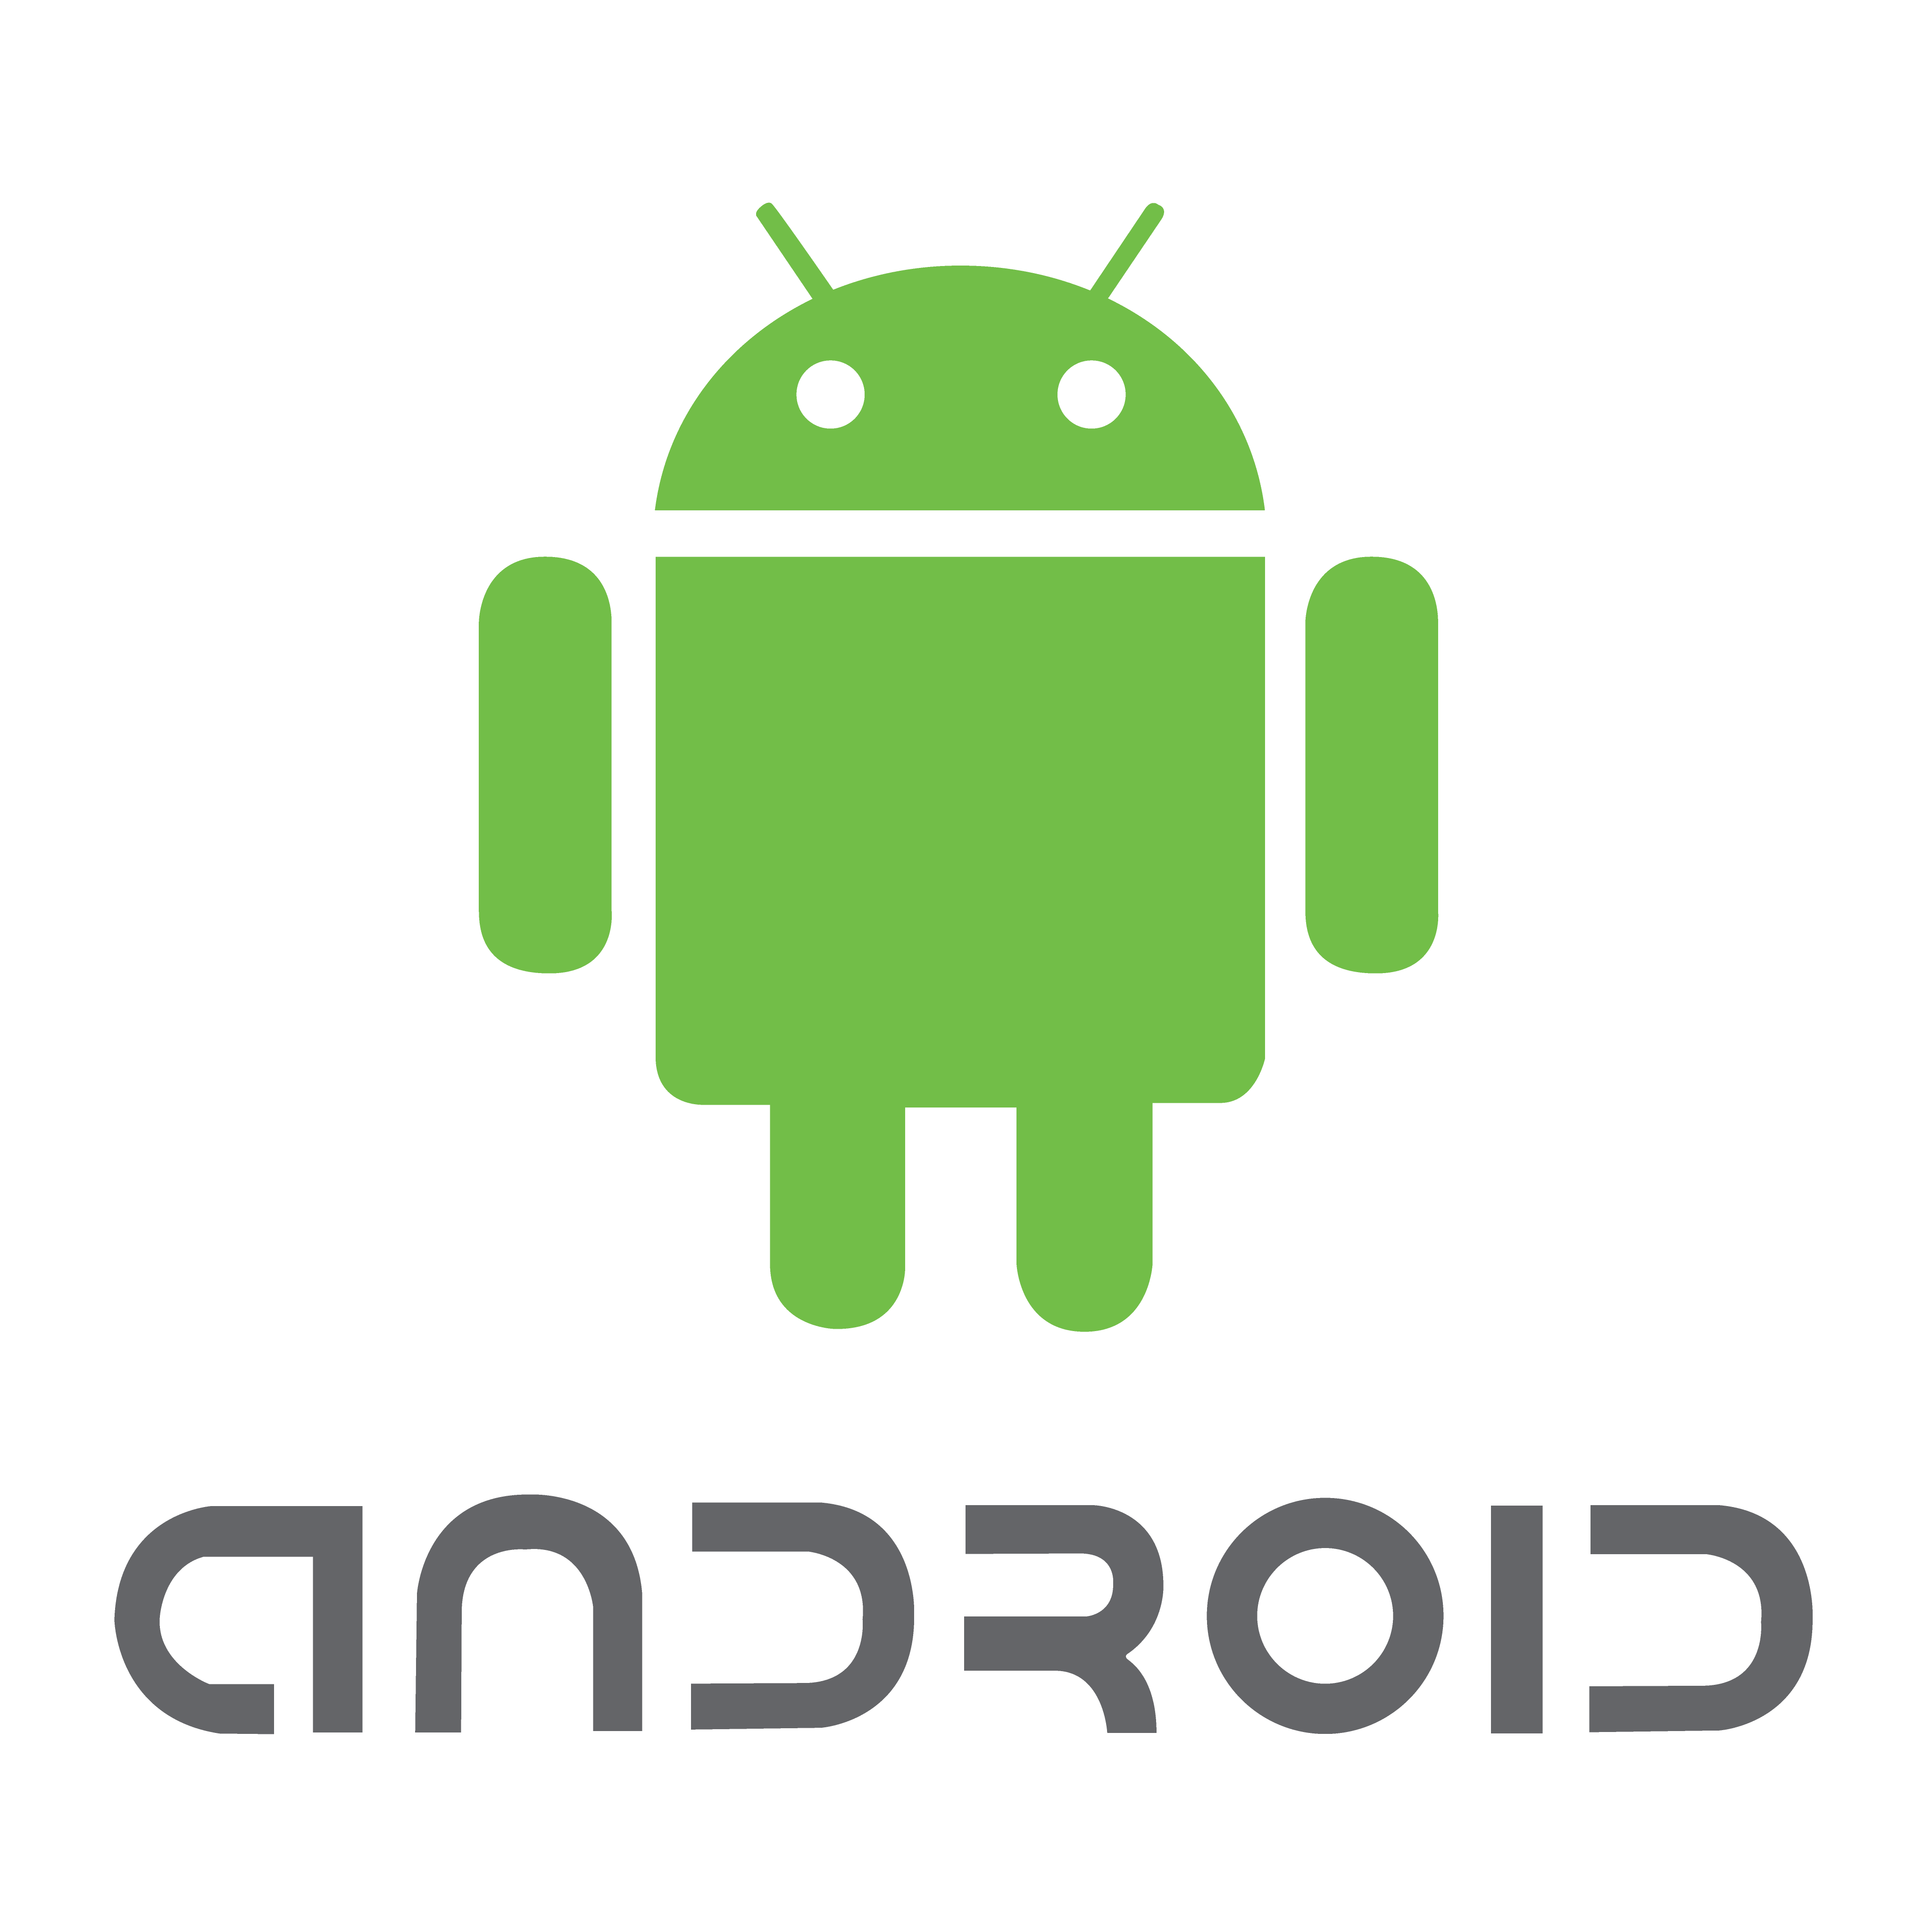 For Android: <https://play.google.com/store/apps/details?id=com.onepay.onepaygo>